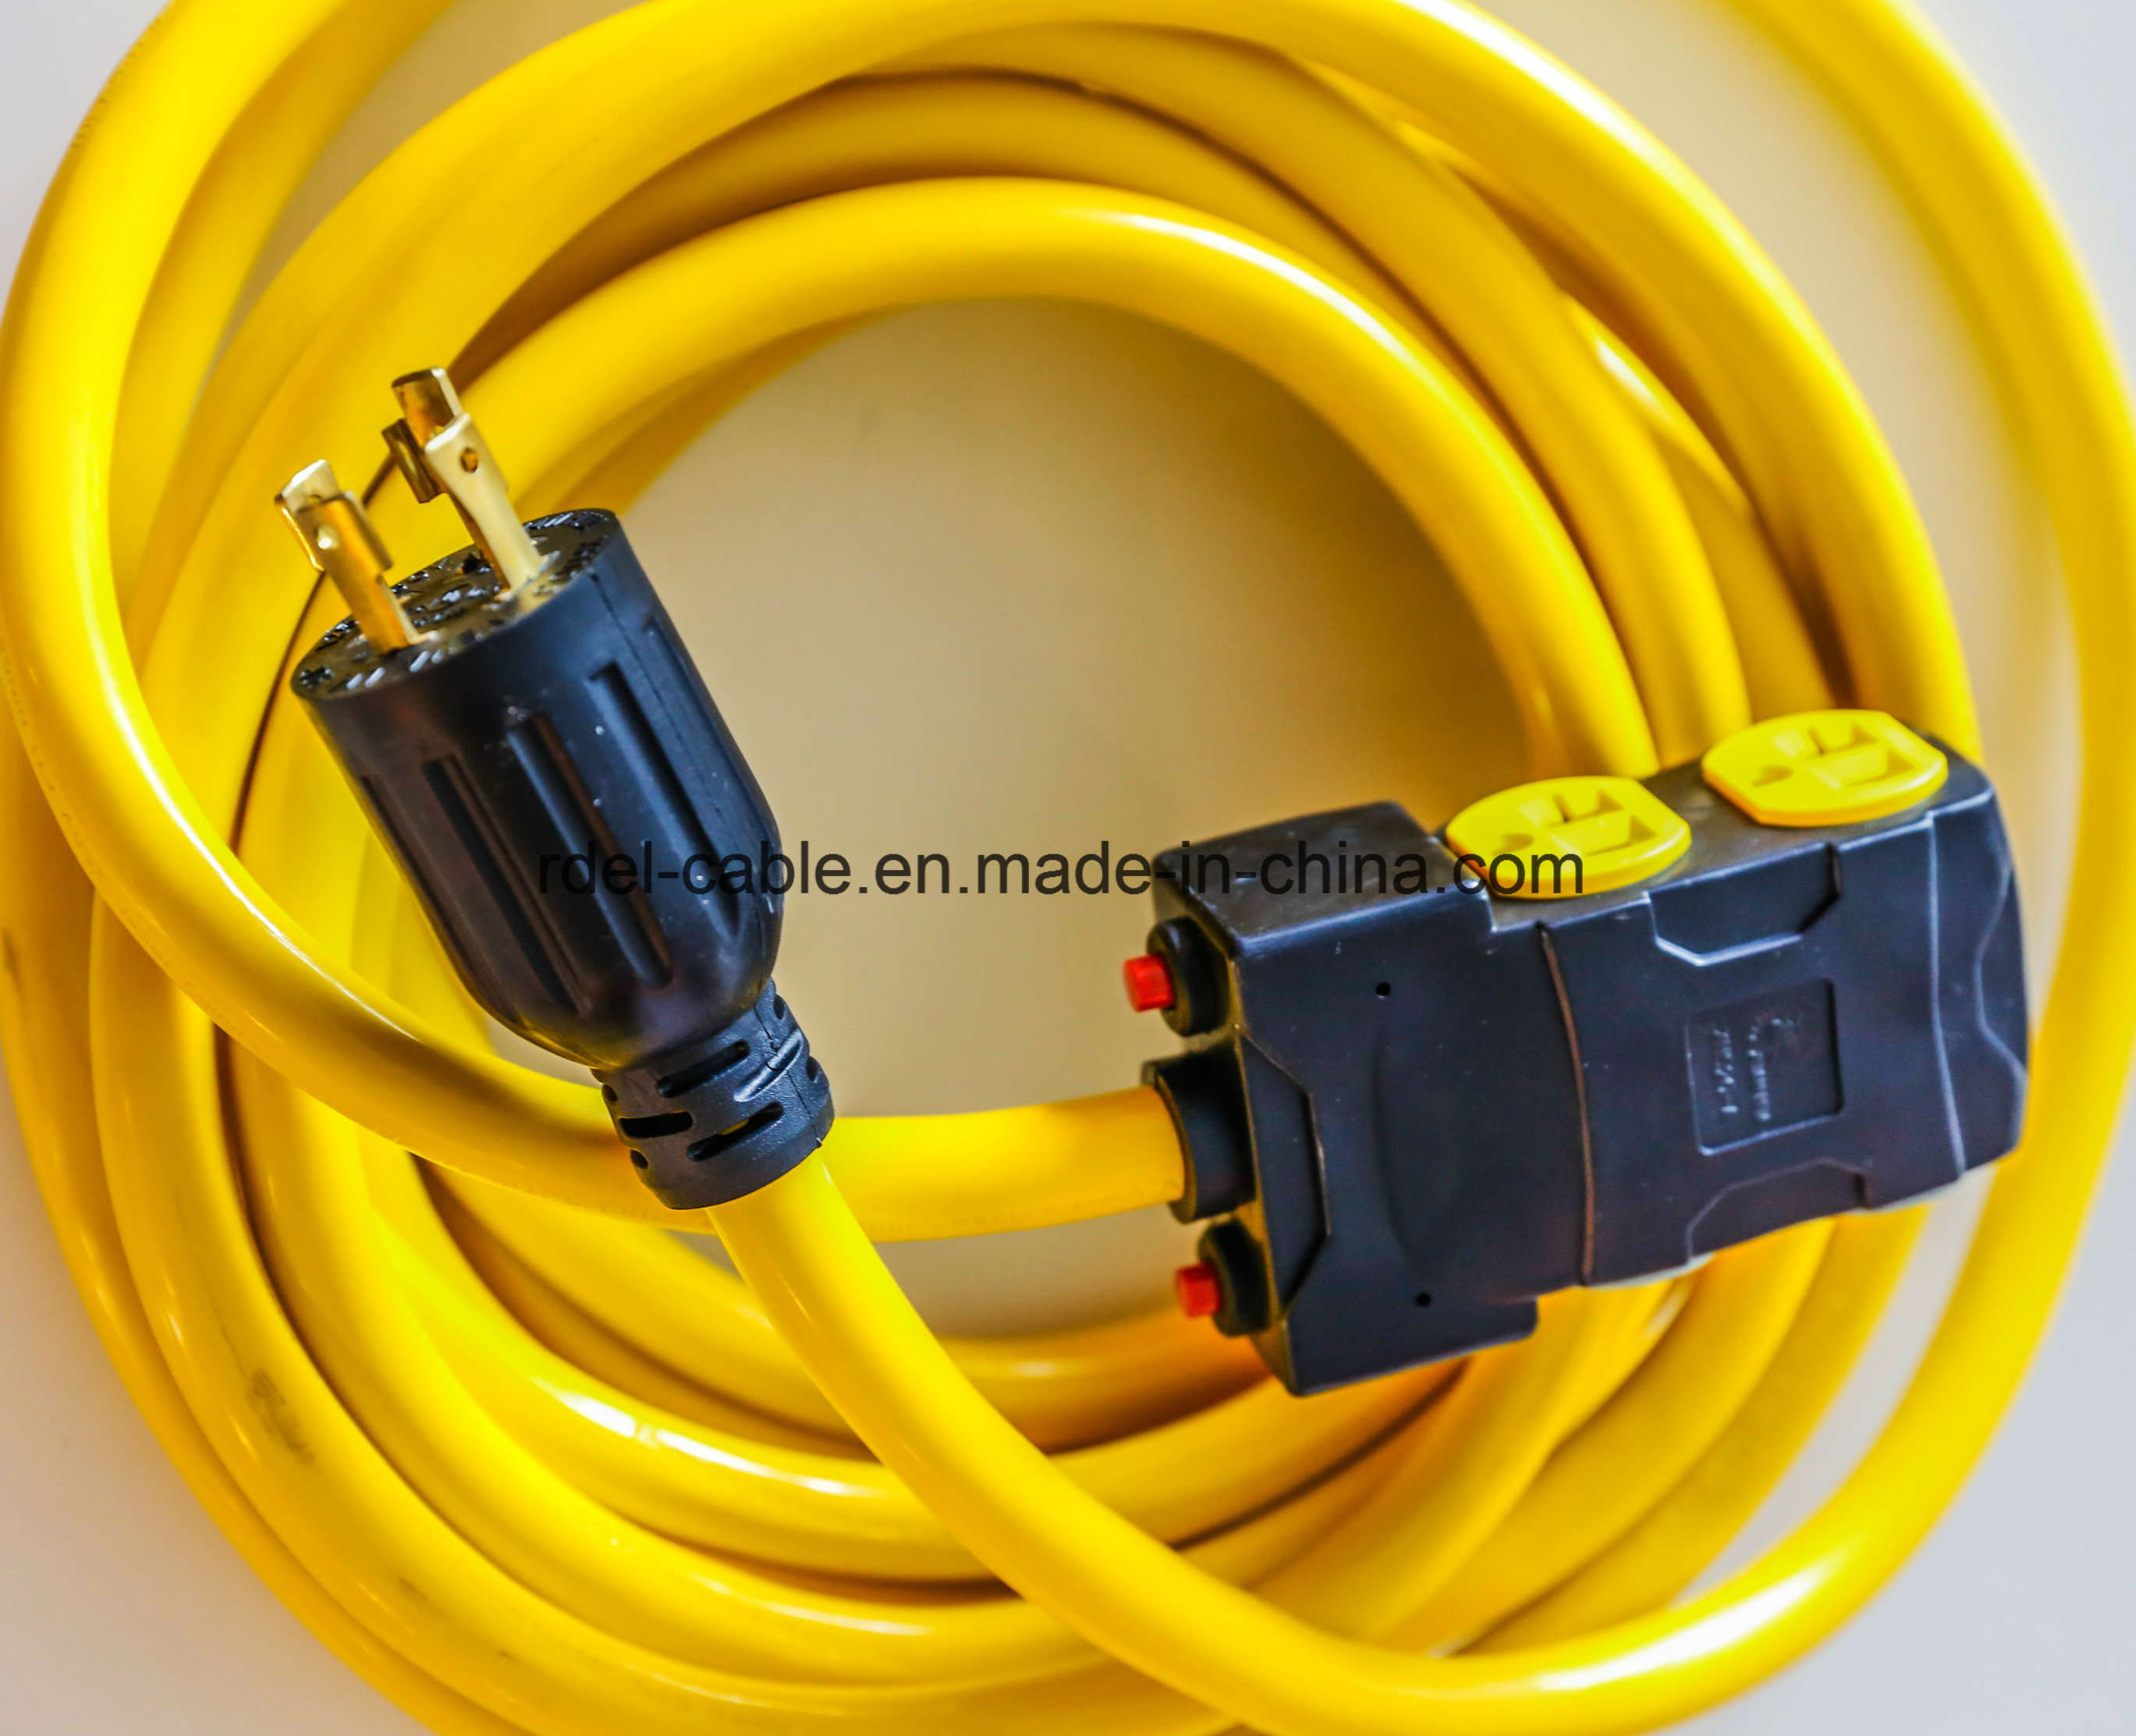 UL Approval NEMA 5-15p Power Cord 3 Pin UL Extension Cord Plug with 3-Pin PVC Female Connector